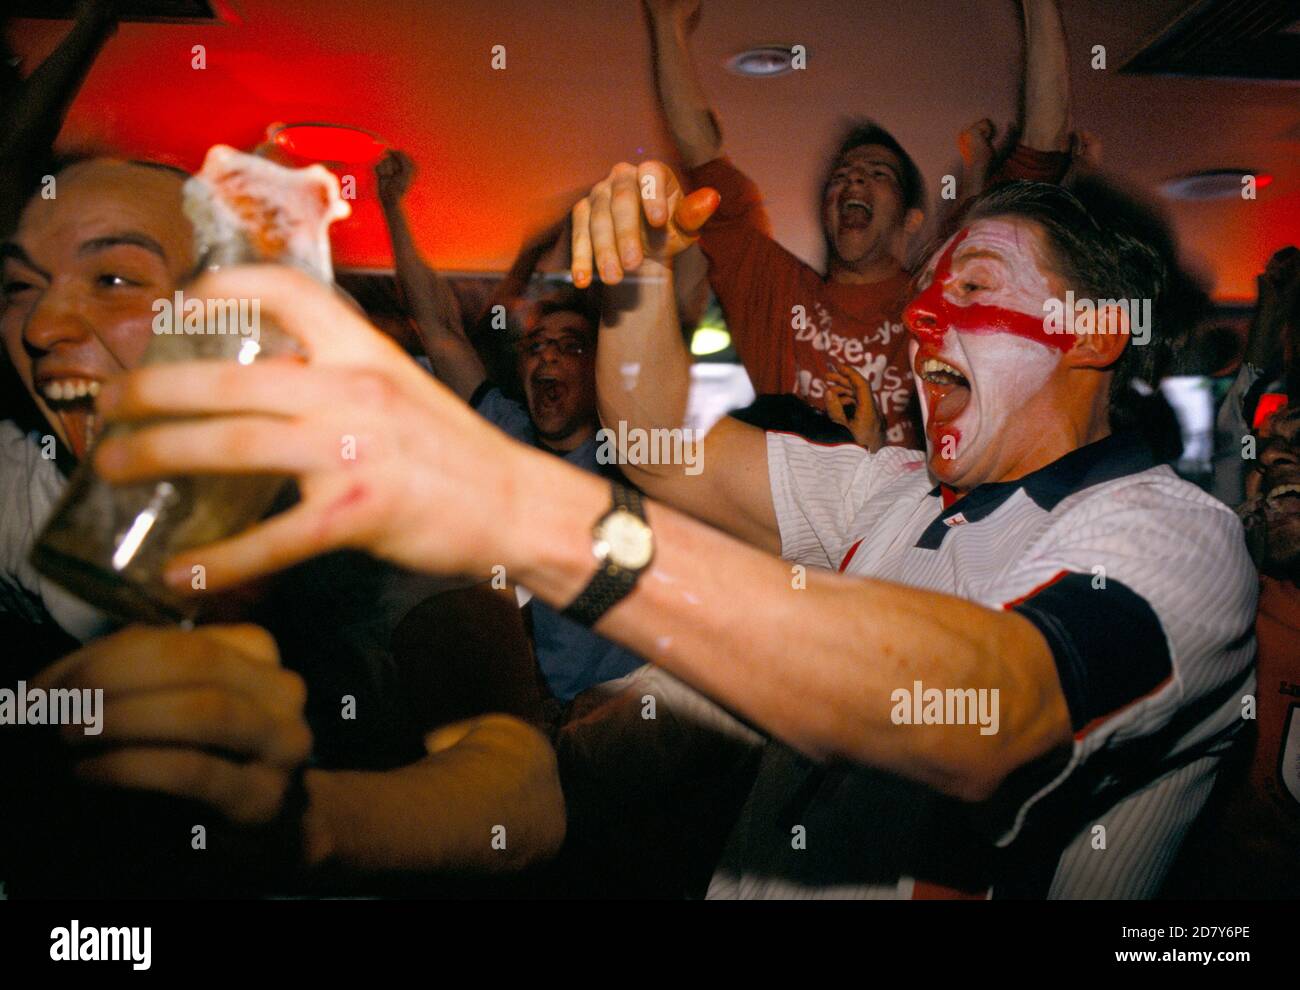 UK football fans World Cup 1998. Supporters watching a penalty shoot out between England and Argentina that decided the game, Argentina won 4–3 after two English kicks were saved. England was  knocked out of the World Cup. Watching on a multi screens in a television room of the Sports Bar, London 1990s UK HOMER SYKES Stock Photo